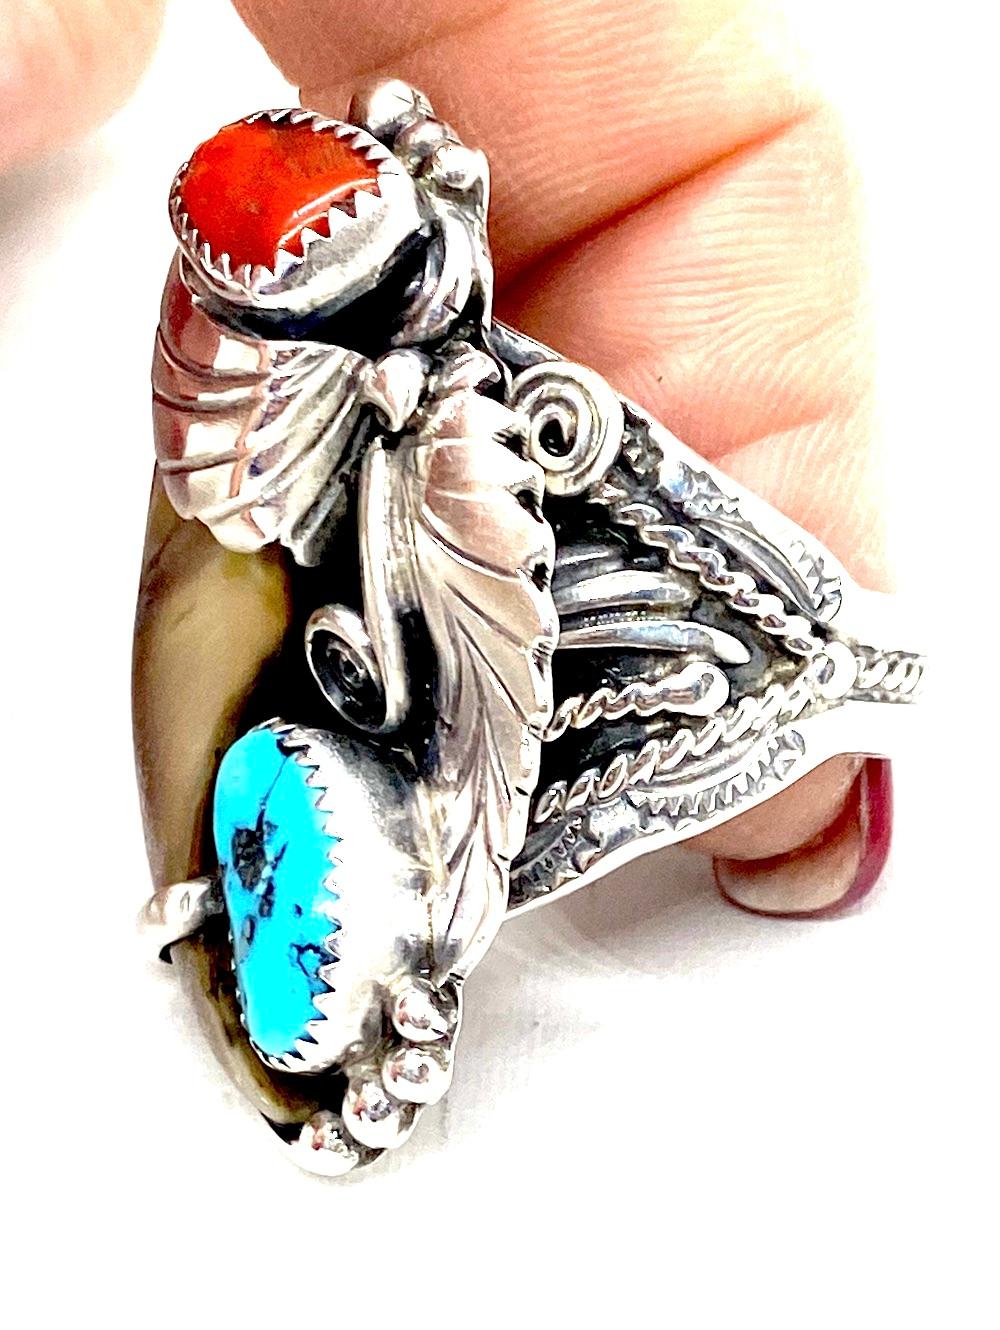 The handmade and intricately designed Ring features a large bear claw. 
The surrounding gemstones are turquoise and coral set in textured bezels.
Color of stones are rich and deep toned.
Bear claw is 1-1/2 inches long by 3/4 inch wide

Size:
1 3/4